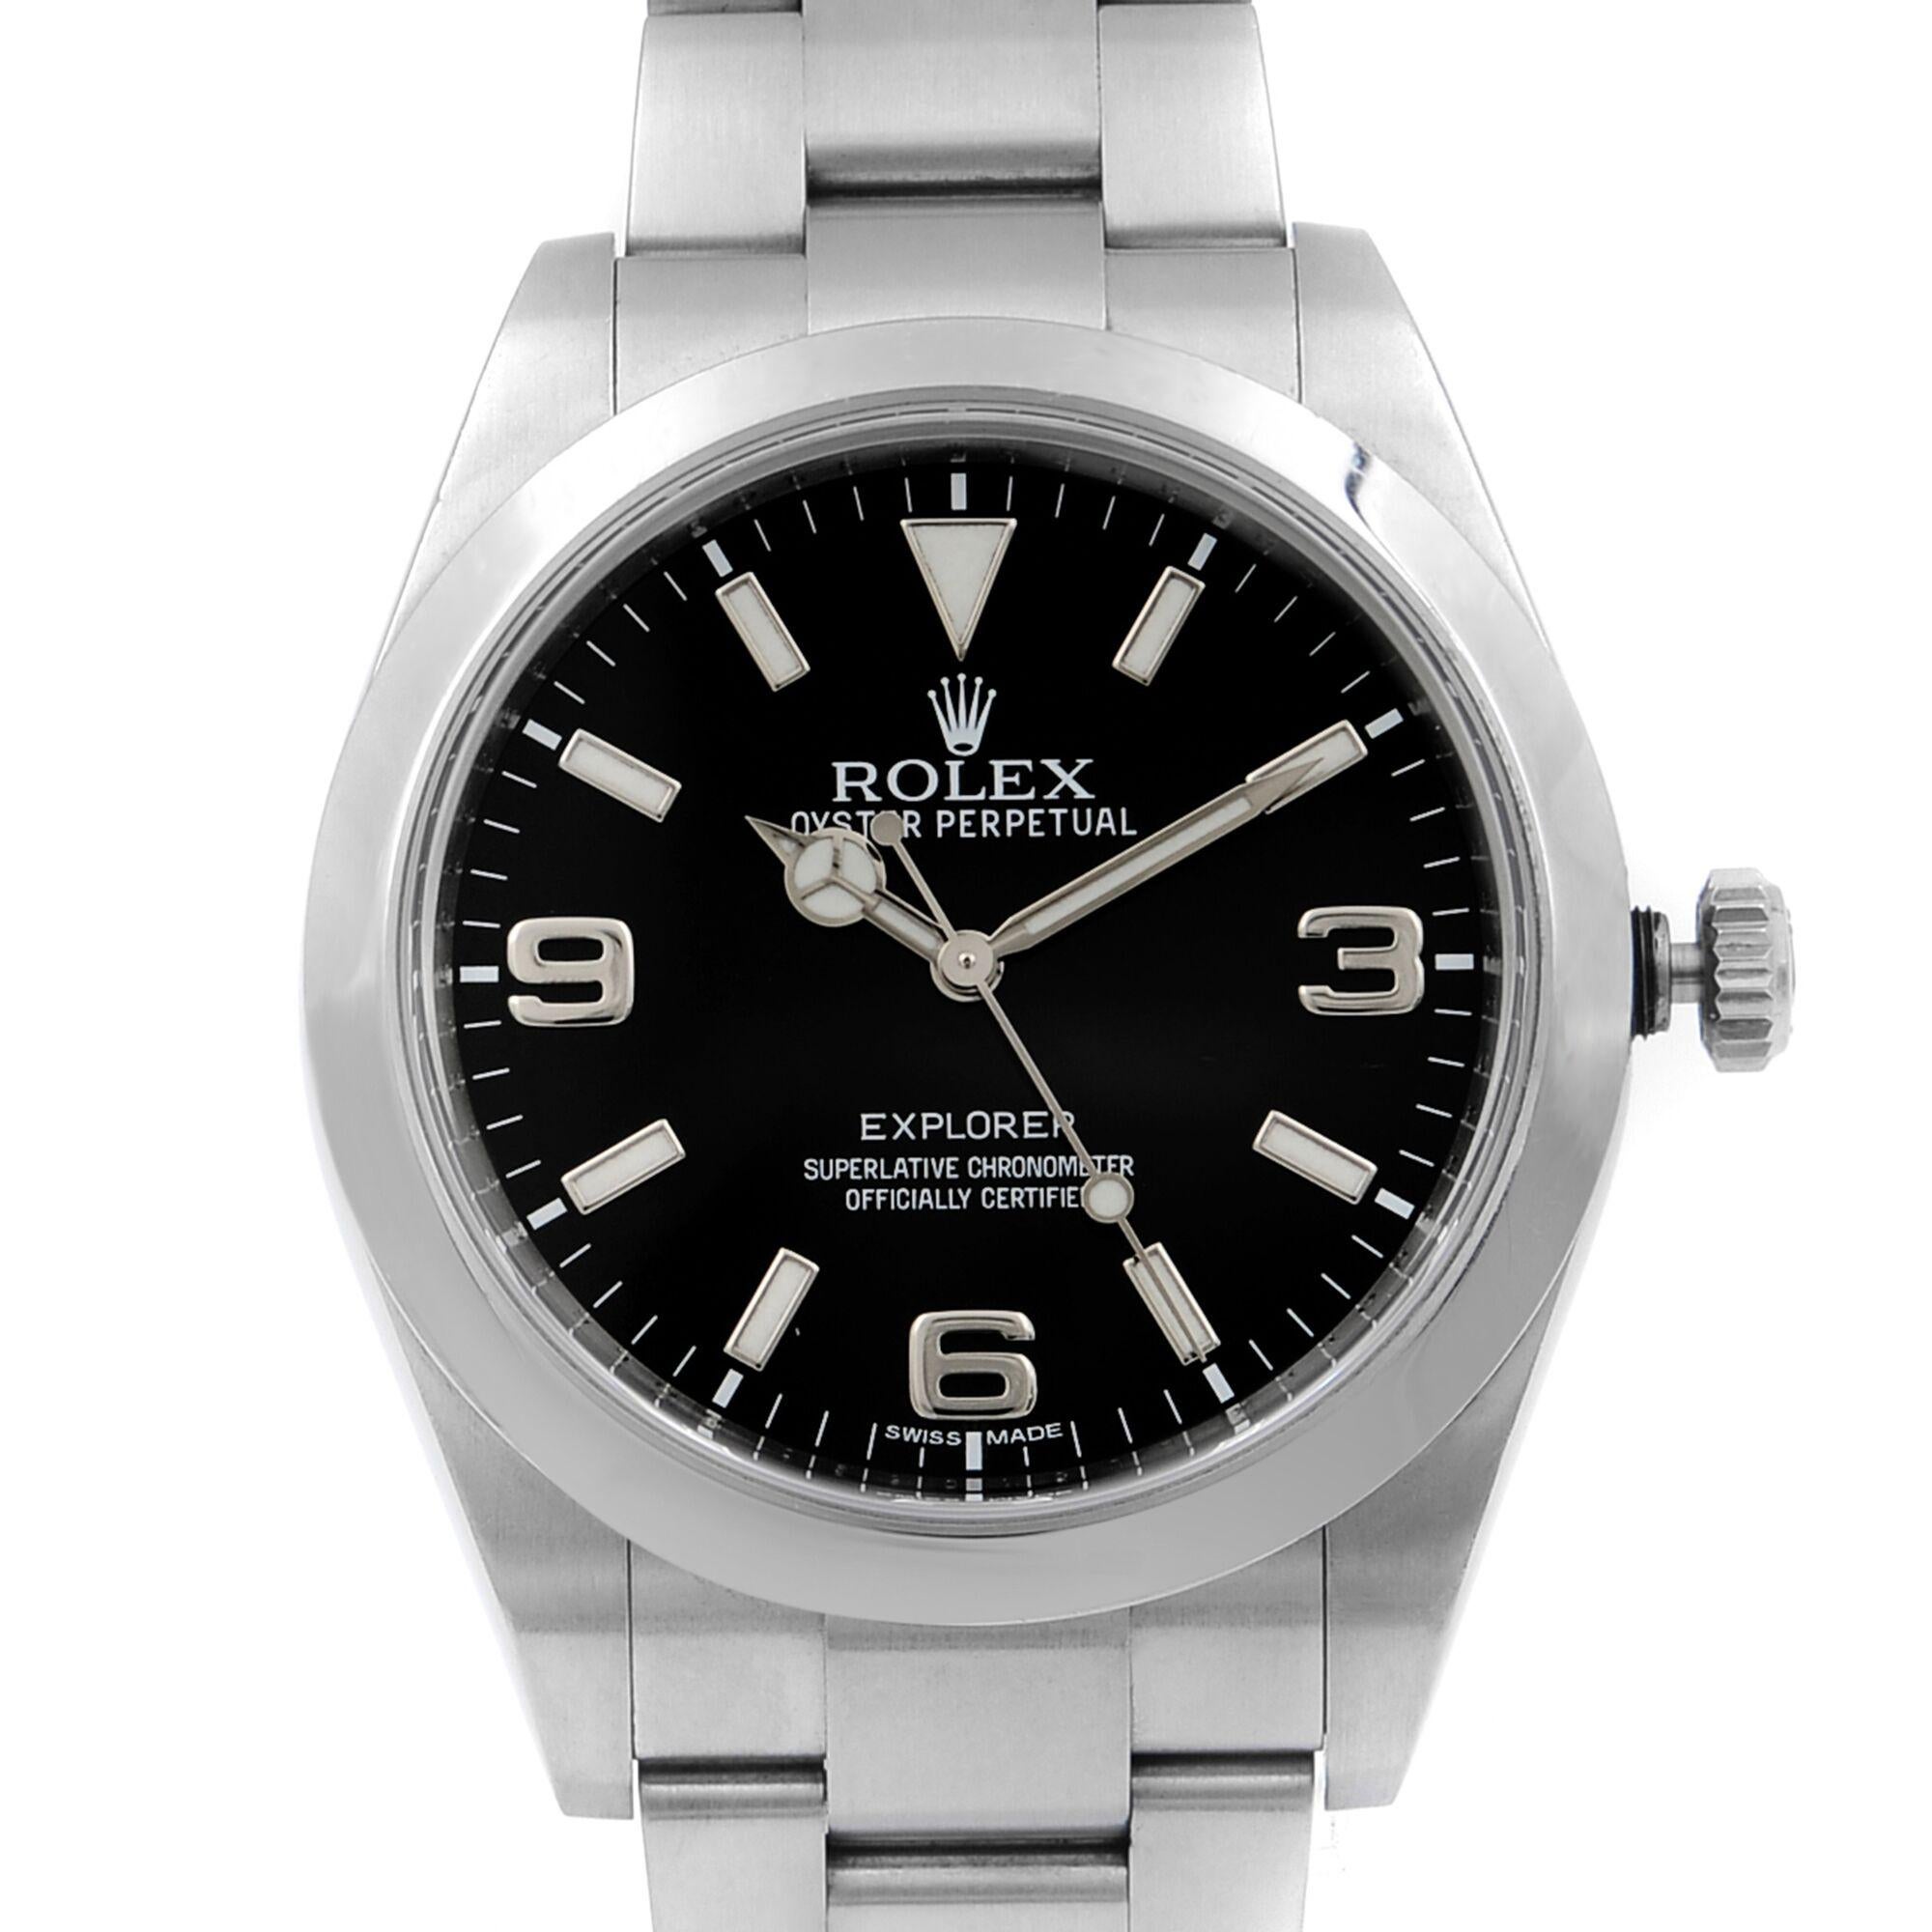 This pre-owned Rolex Explorer 214270 is a beautiful men's timepiece that is powered by mechanical (automatic) movement which is cased in a stainless steel case. It has a round shape face,  dial and has hand sticks & numerals style markers. It is